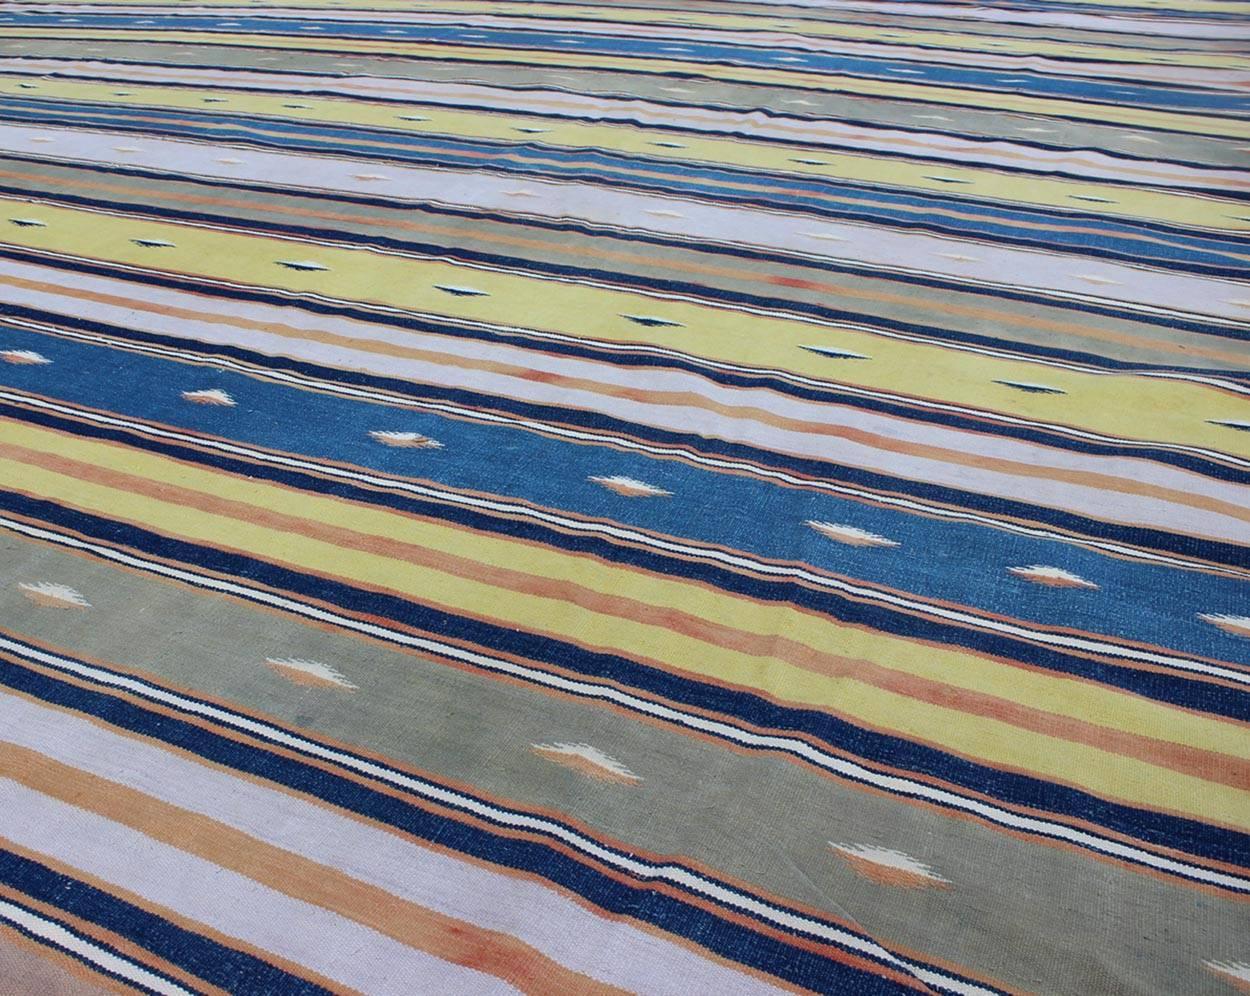 Hand-Woven Long Vintage Cotton Dhurrie Rug with Stripe design in Blue, Yellow Green & Brown